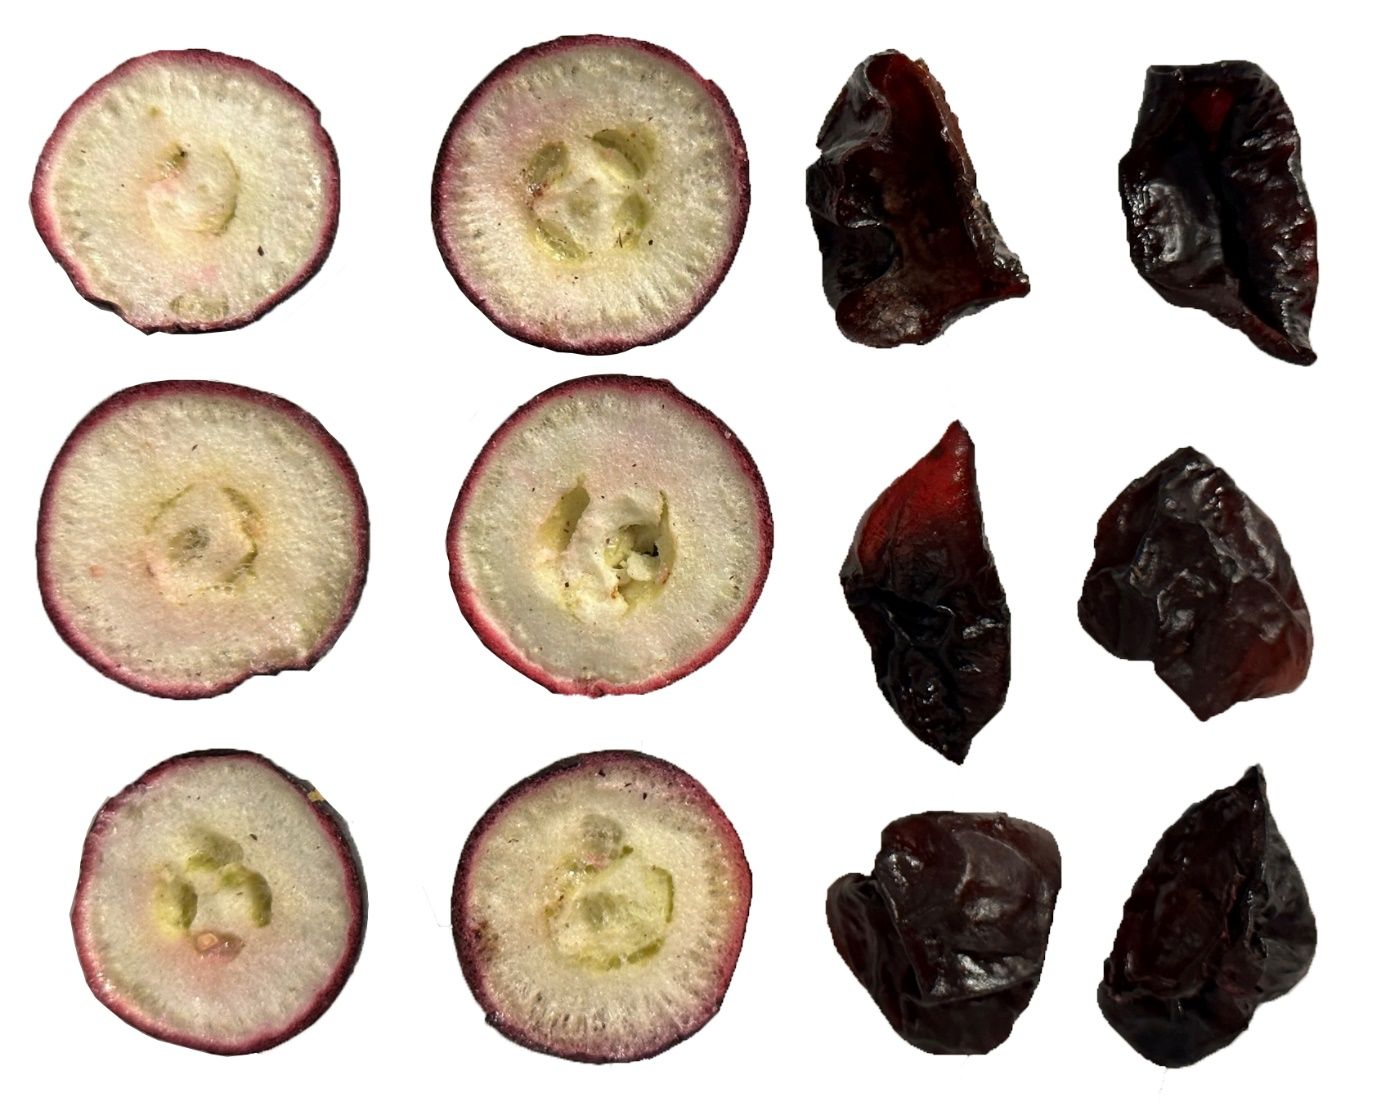 Differences in appearance between freeze-dried (left) and oven-dried (right) muscadine fruit halves.